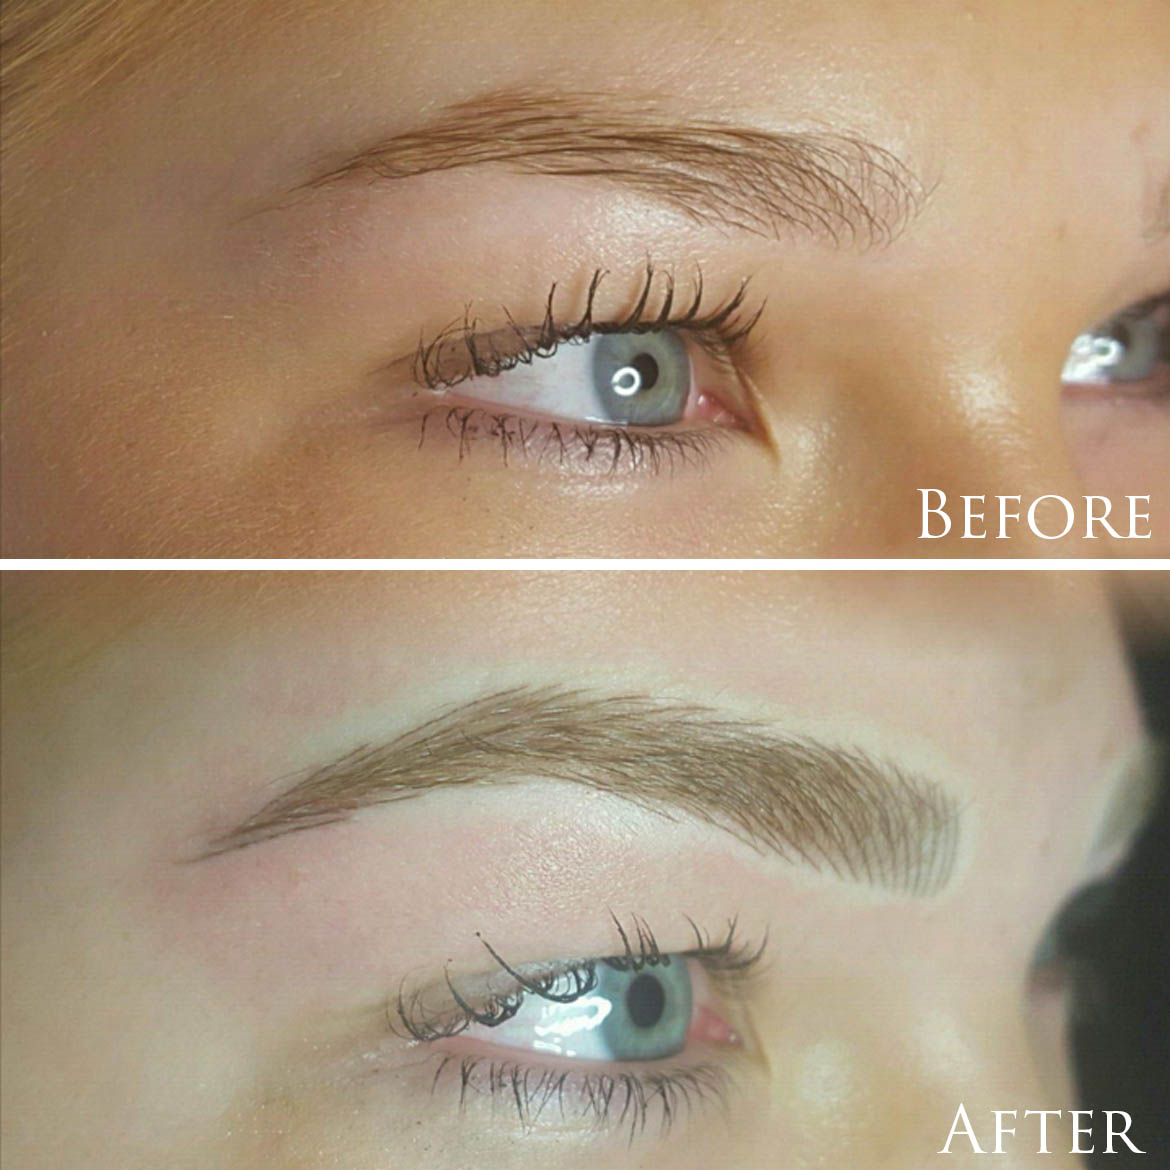 Salon Lashe | Before and After microblade eyebrows Chicago